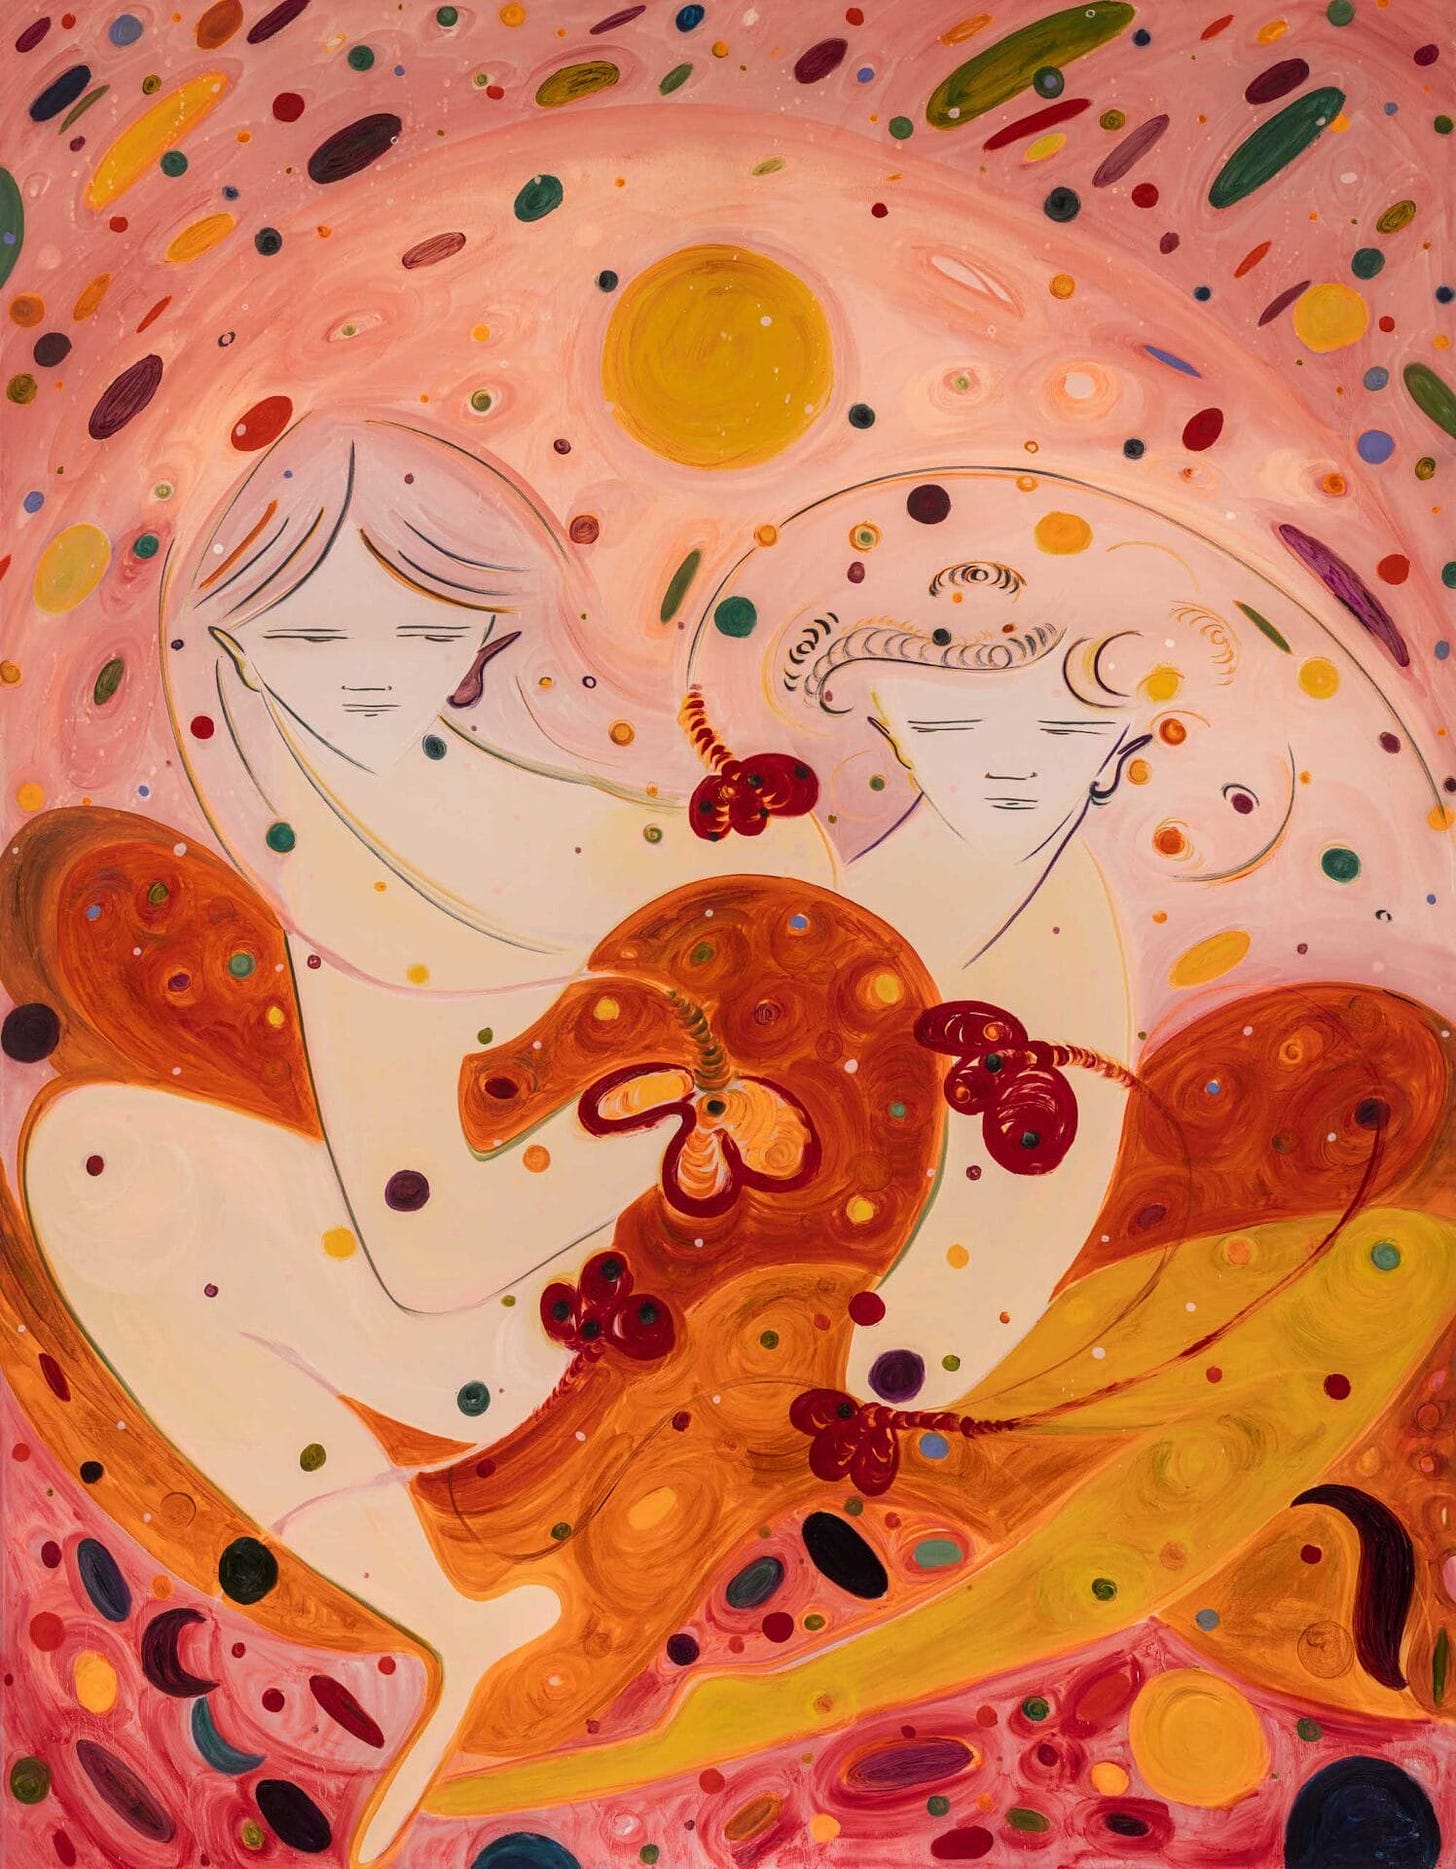 A colorful, abstract oil painting of two figures in front of an orange background with colorful spots and dashes.